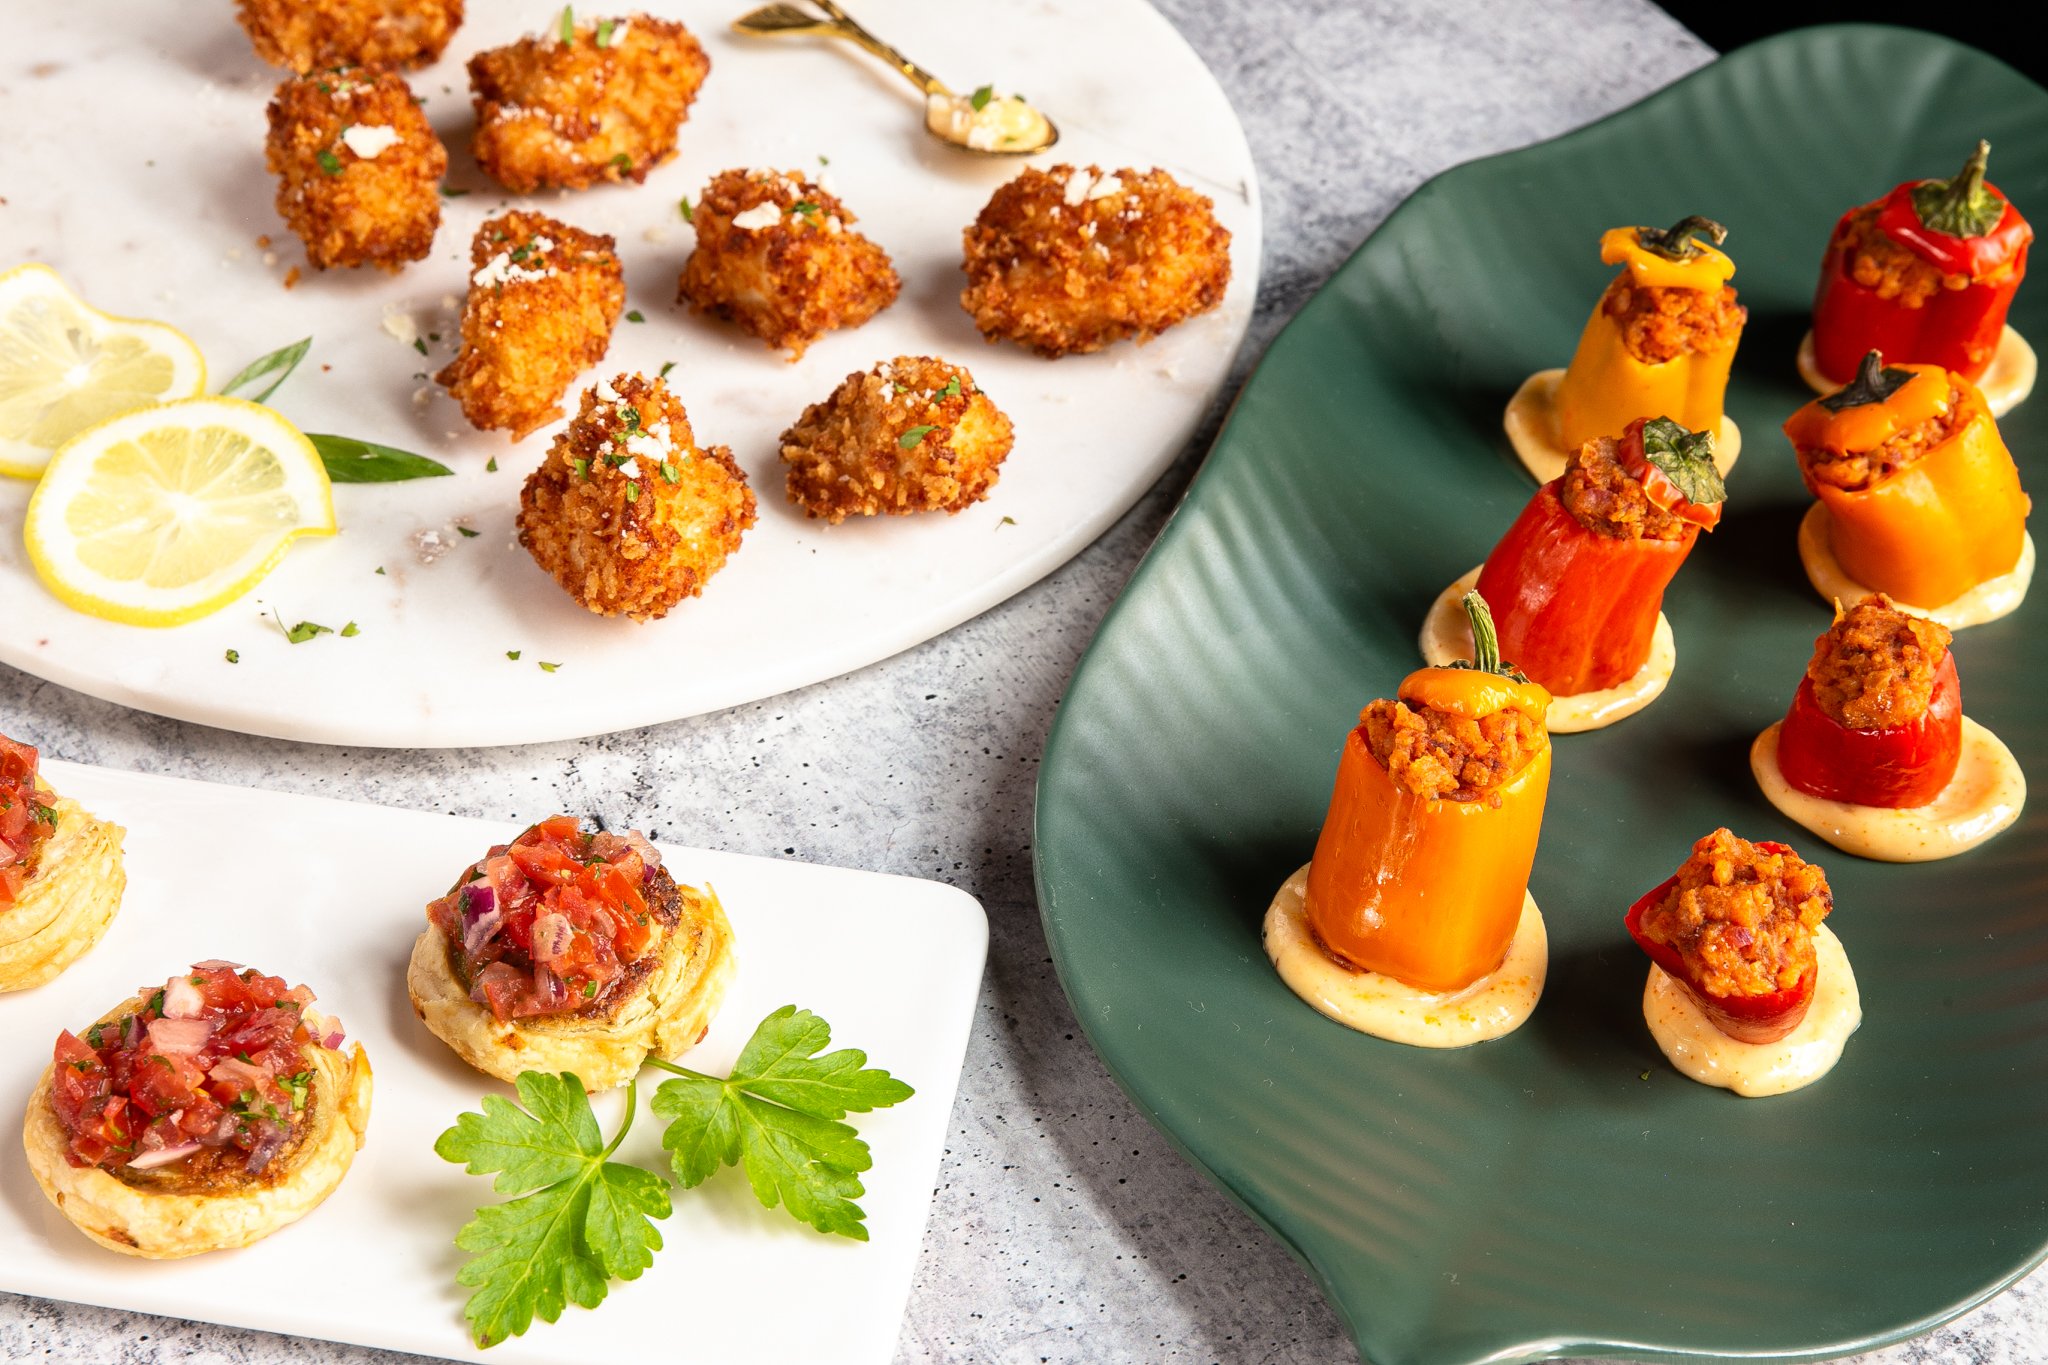  Platters of several different hors d’oeuvres, including Parmesan Herb Chicken Bites, Tomato Pesto Palmier, and Chorizo Stuffed Peppers, are placed next to each other on a light gray countertop. 